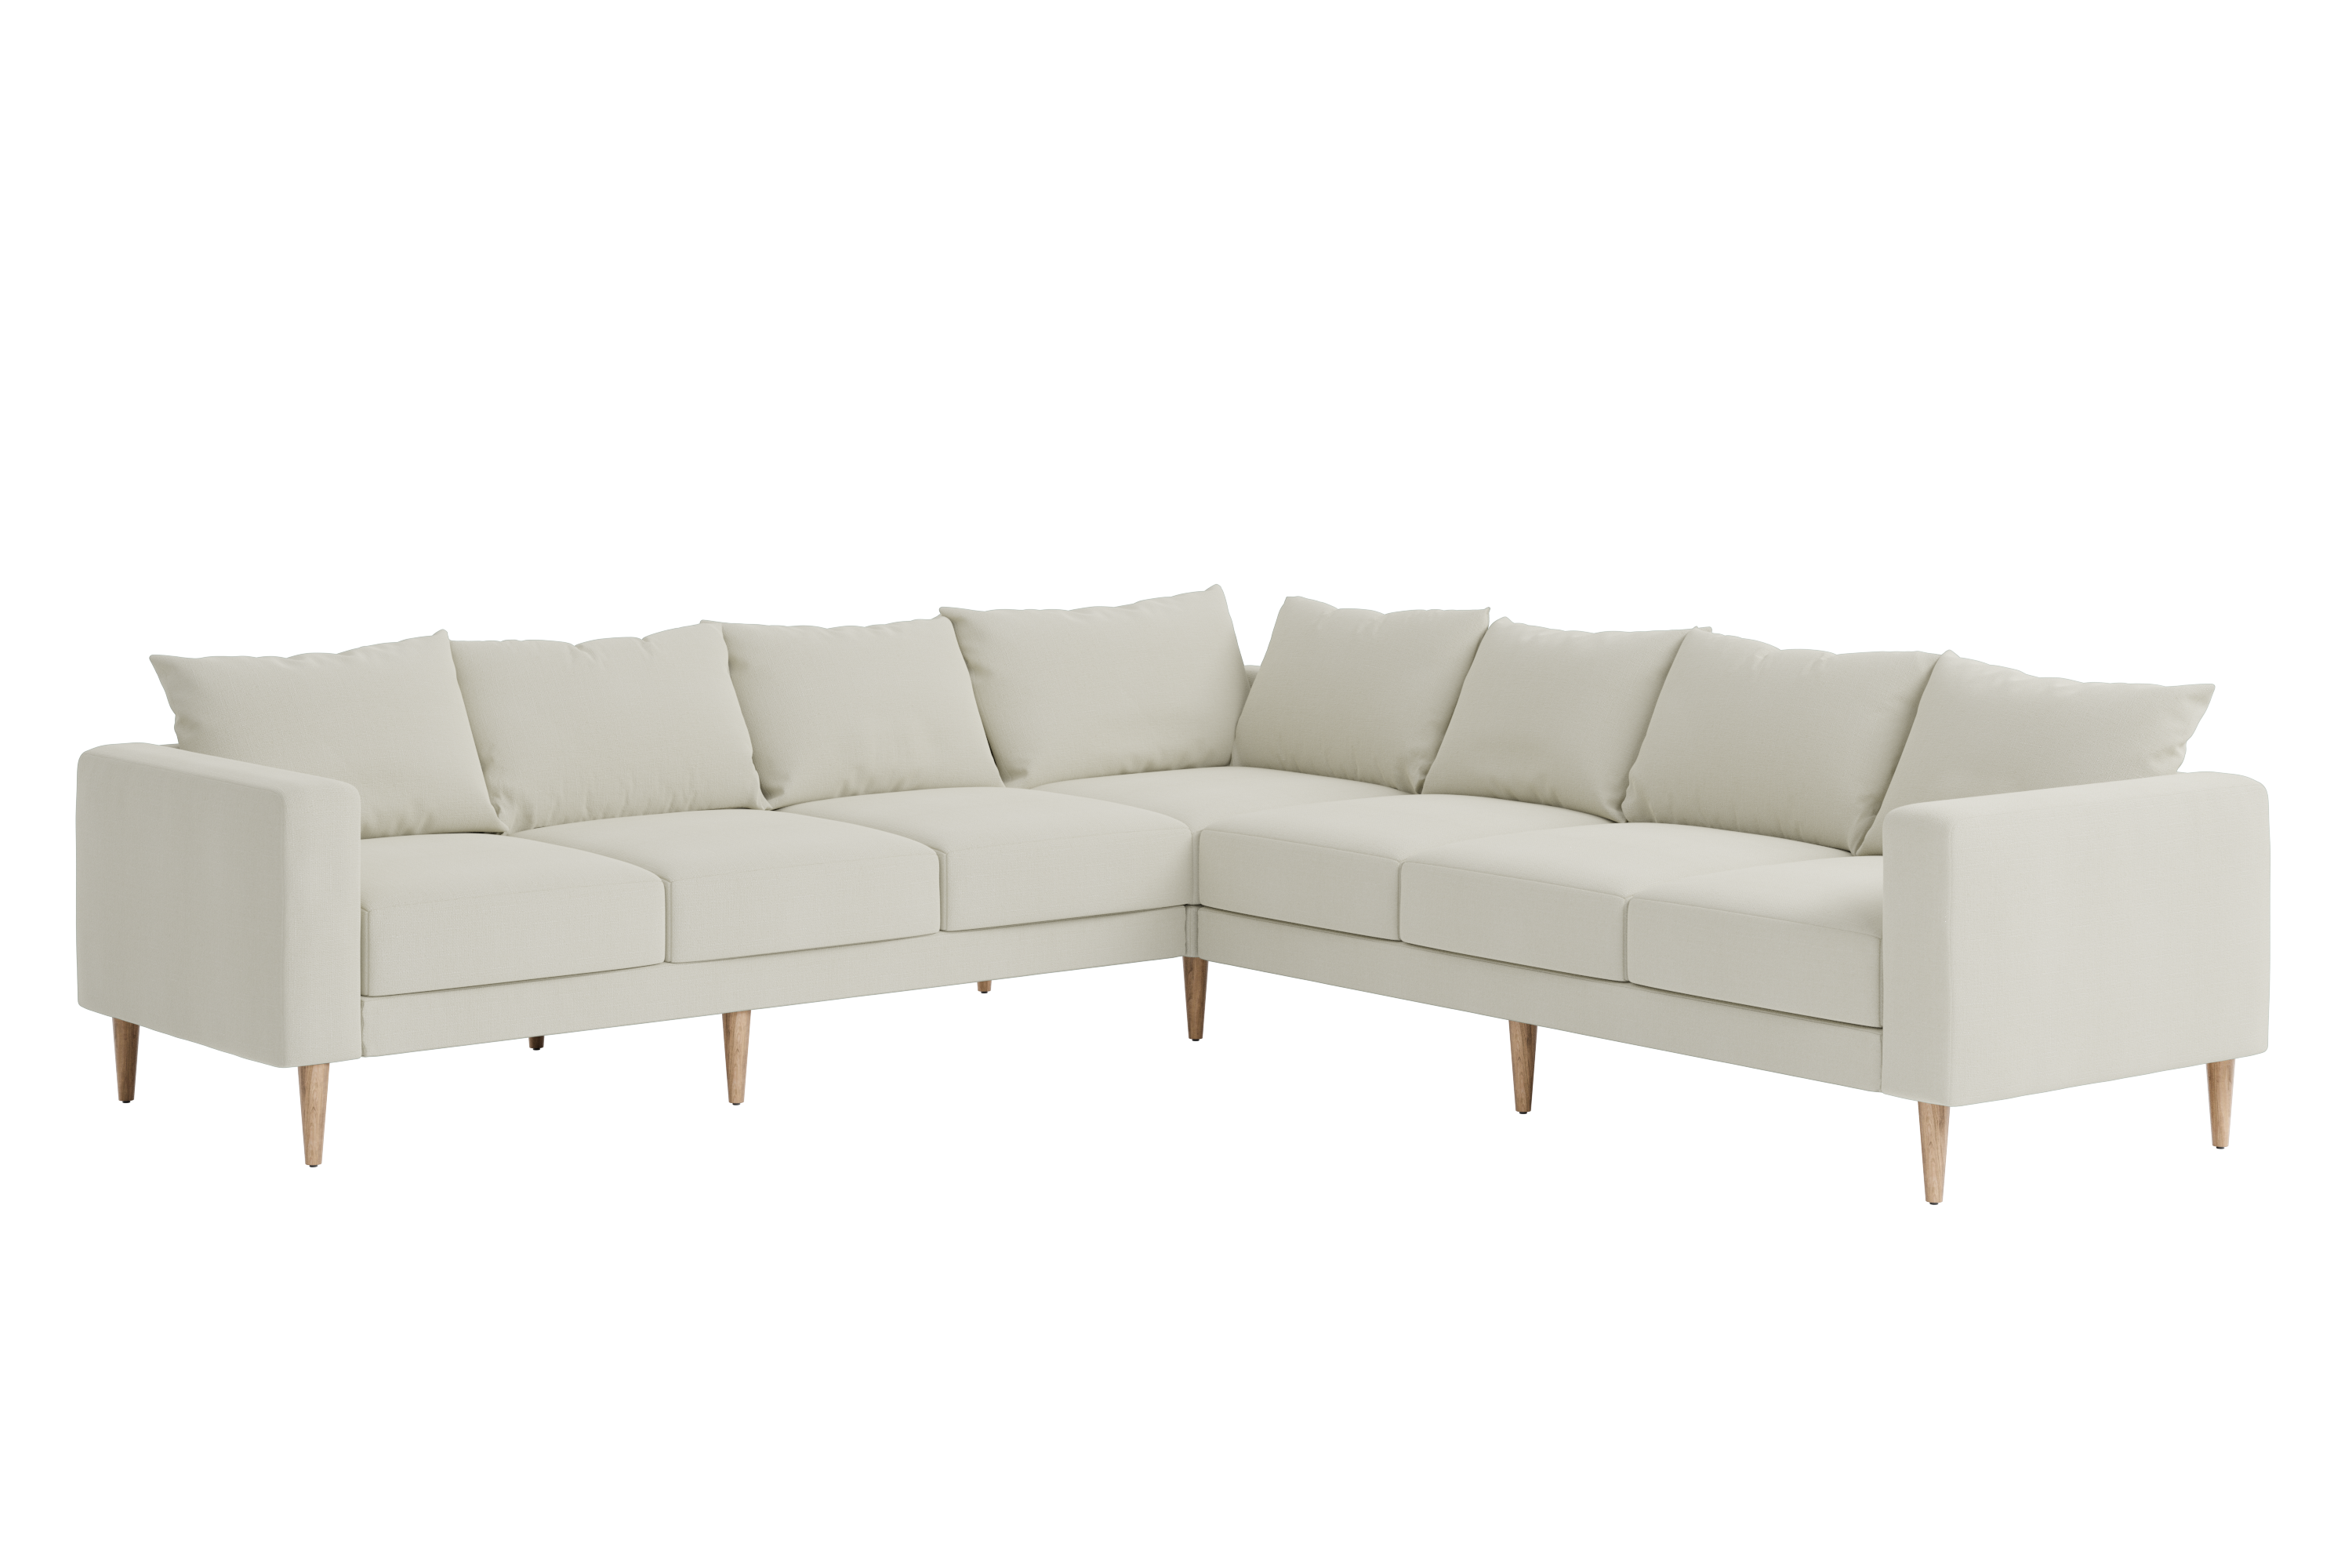 The Essential Corner Sectional (7 Seat) in Recycled Velvet